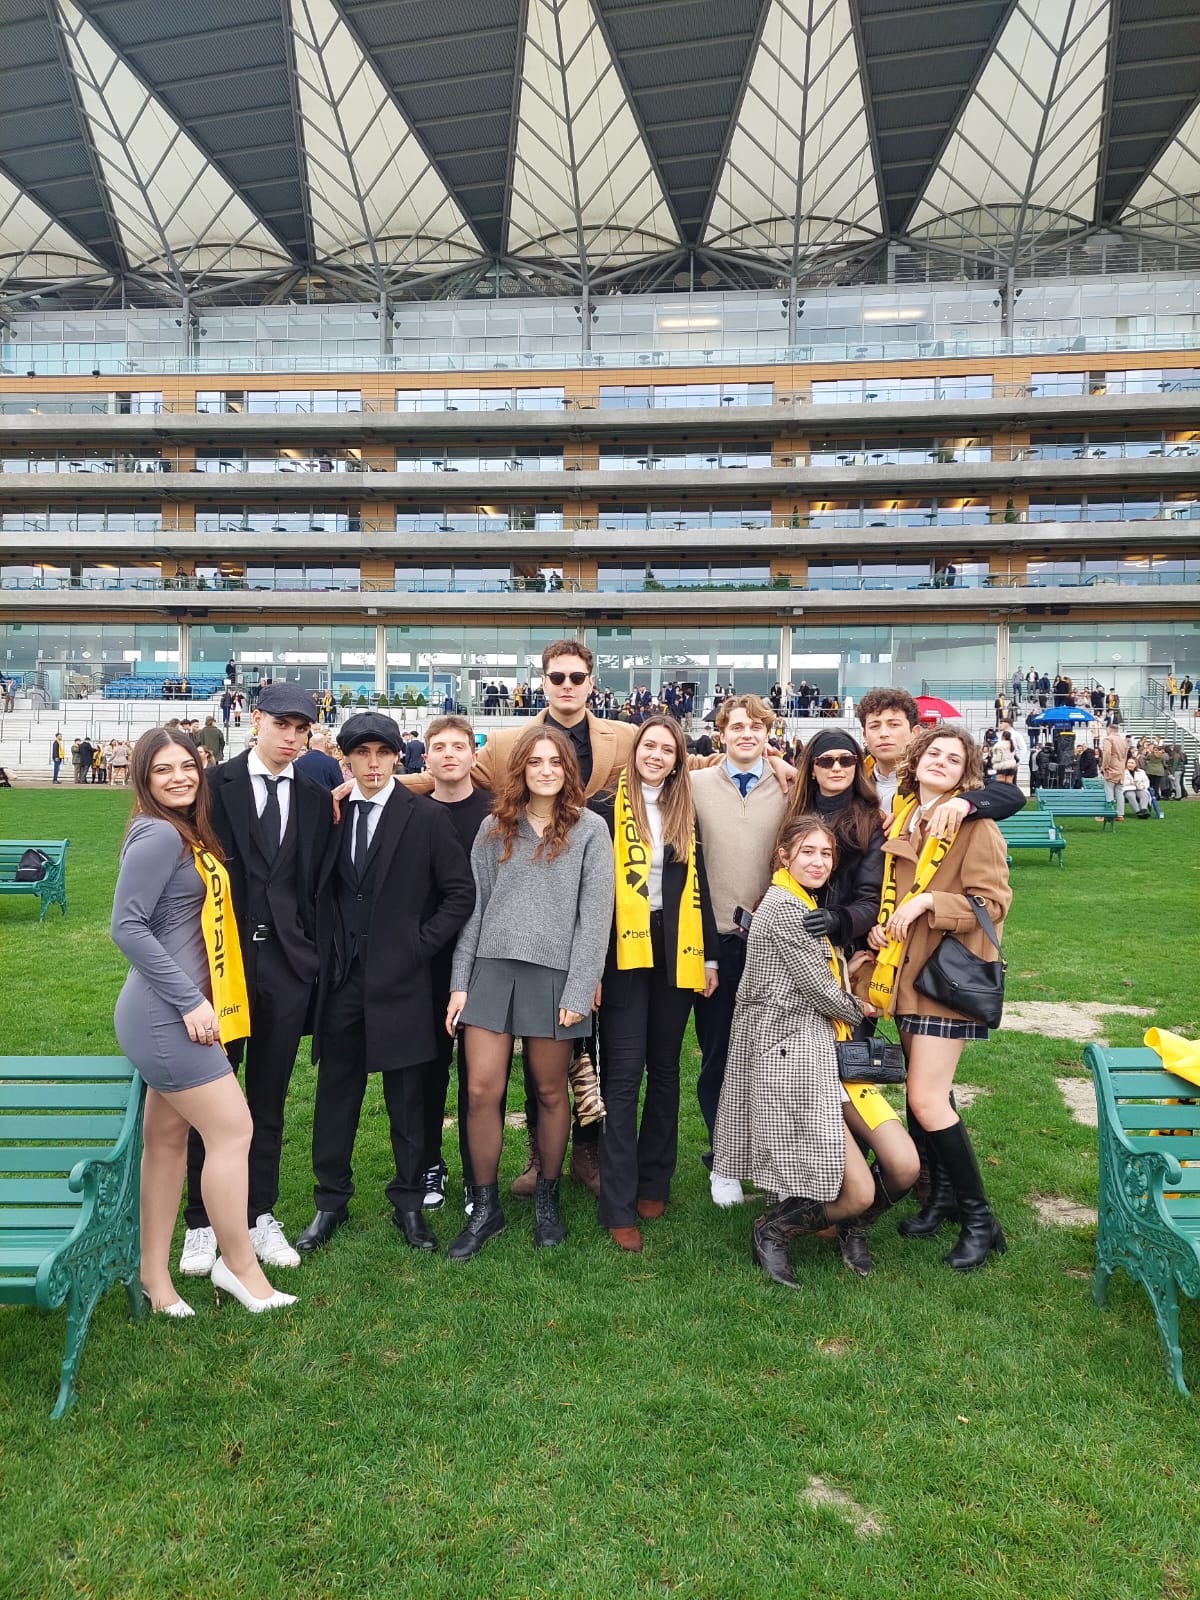 Tommaso and friends at Ascot Racecourse.